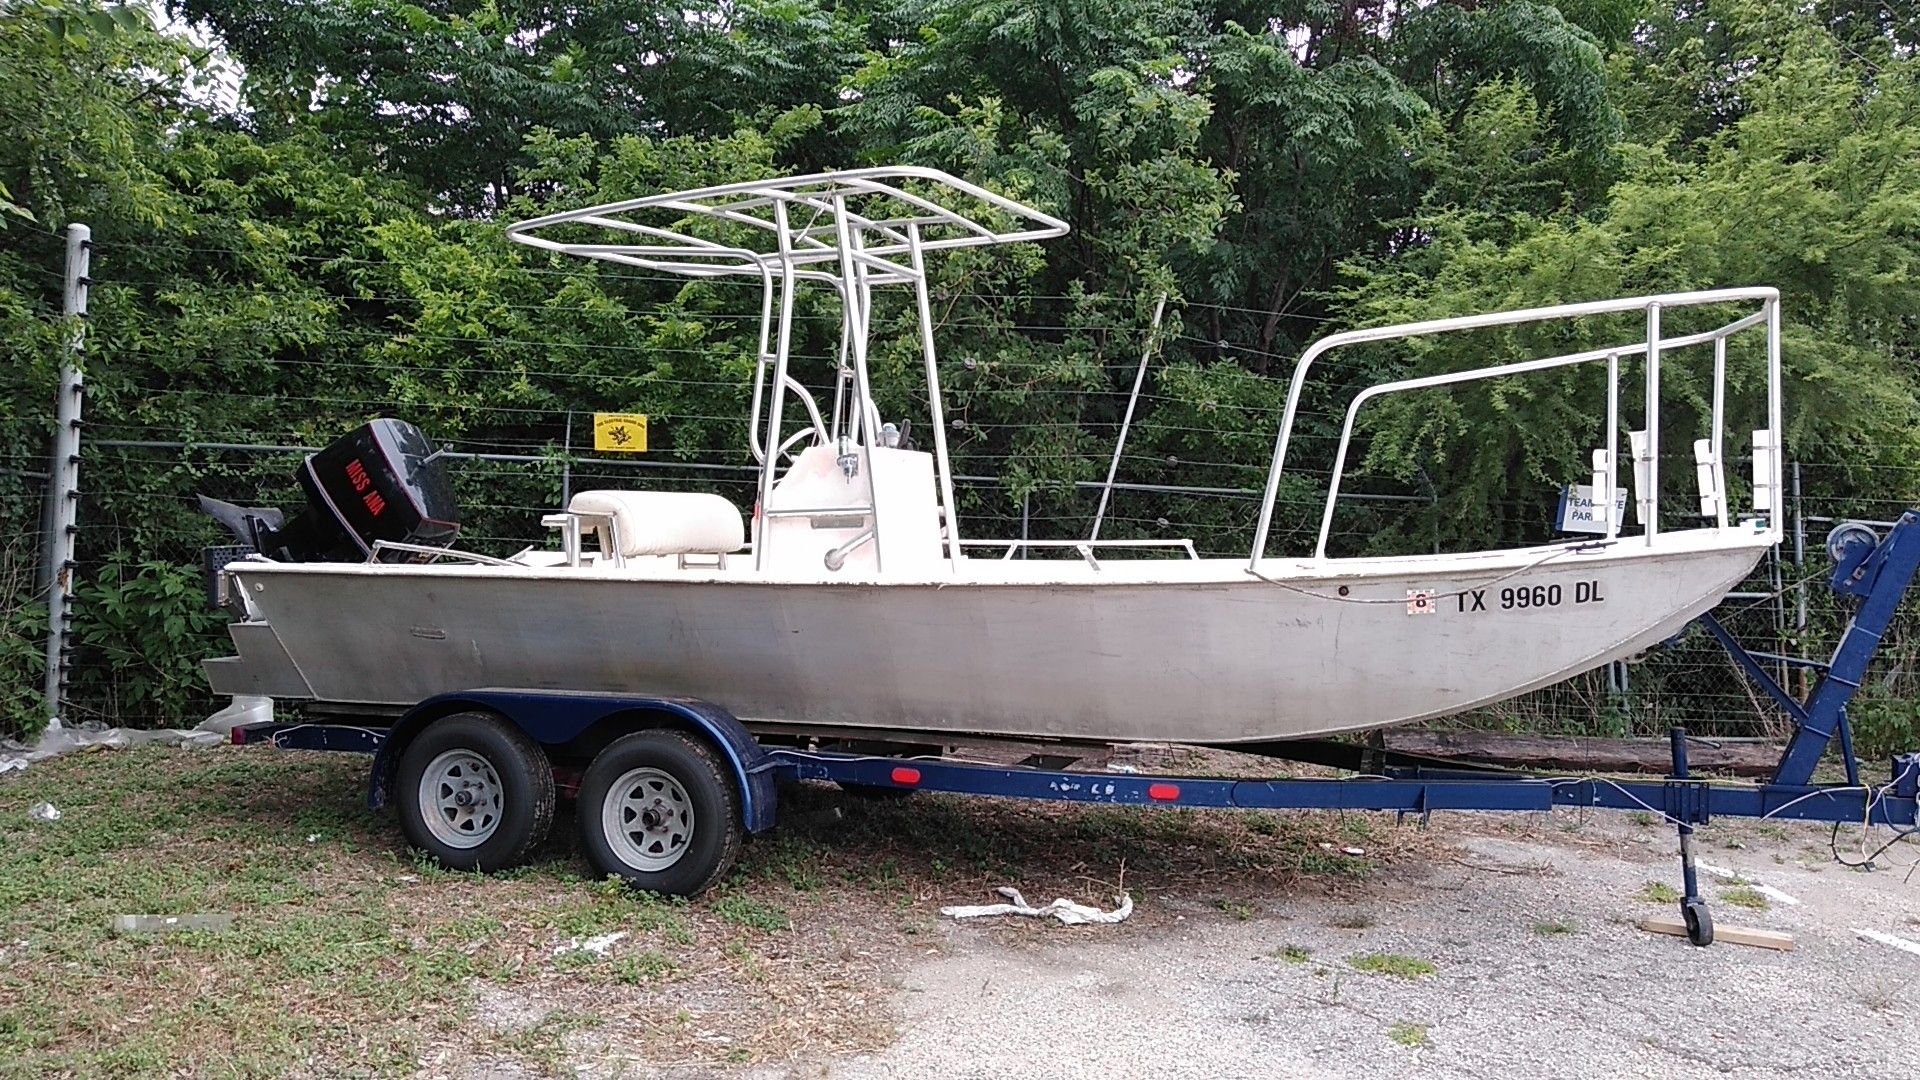 Boat for sale this boat is a tank aluminum in and out will go in one foot of water still has tags until next year will never roat solid 100percent